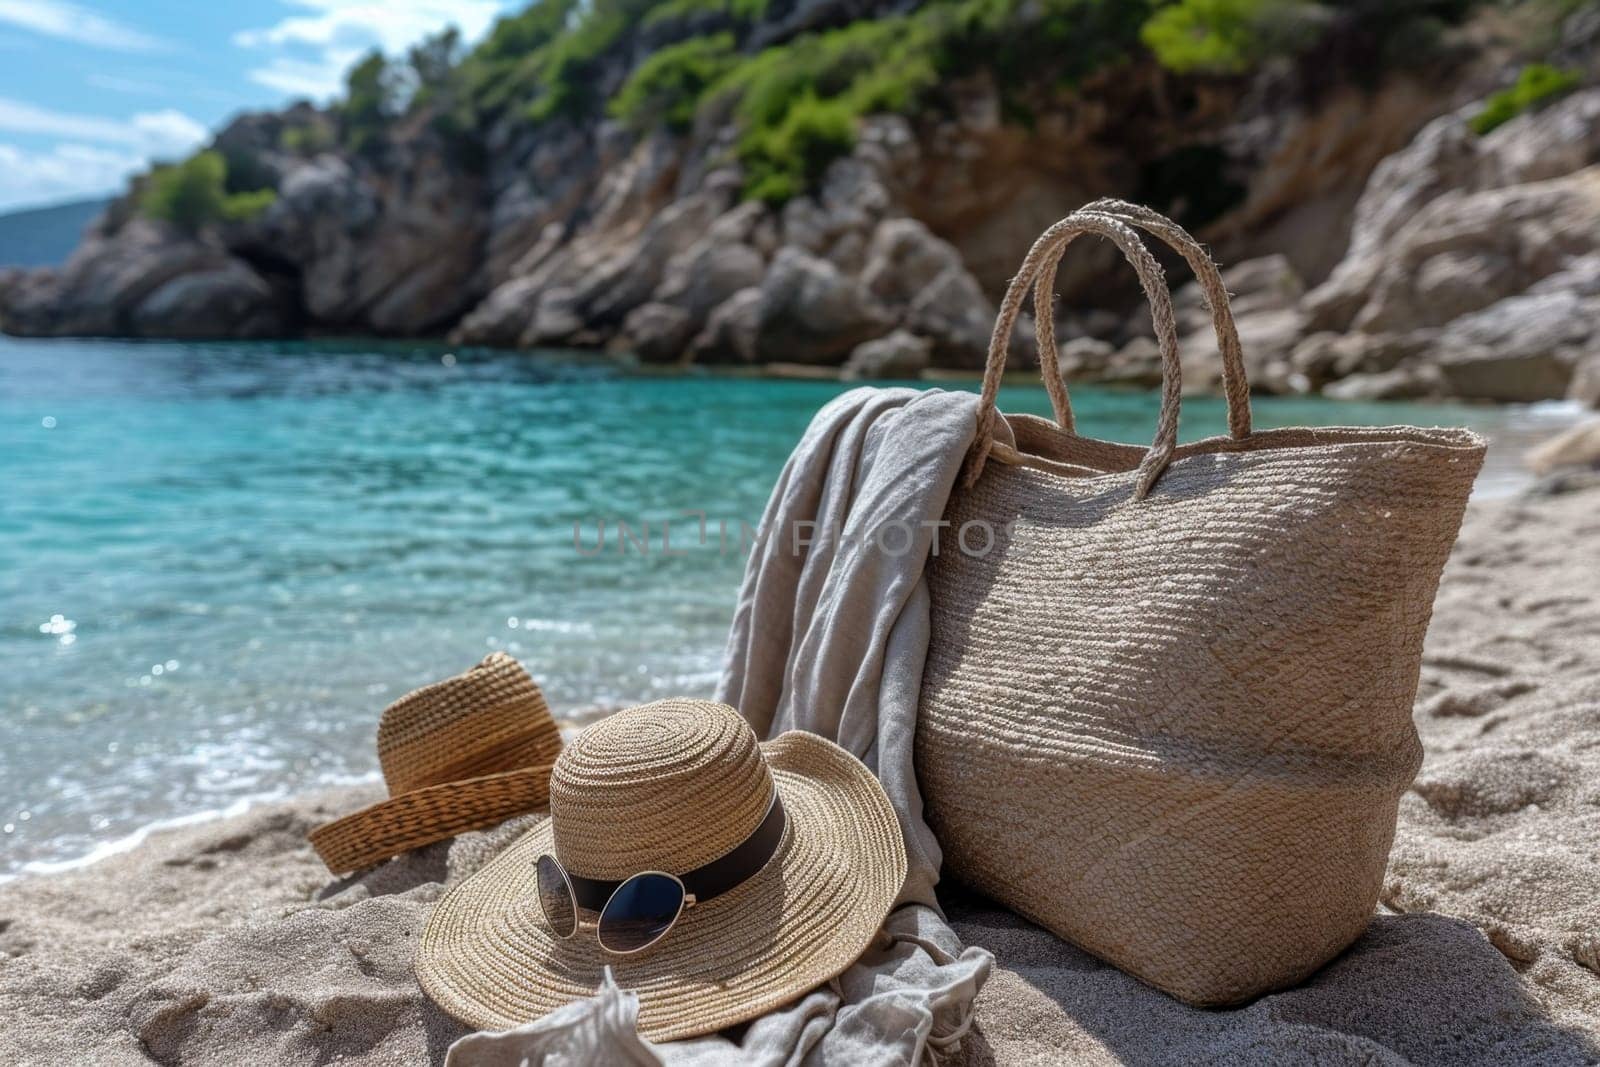 Straw hat, bag and sunglasses on a tropical beach by Lobachad